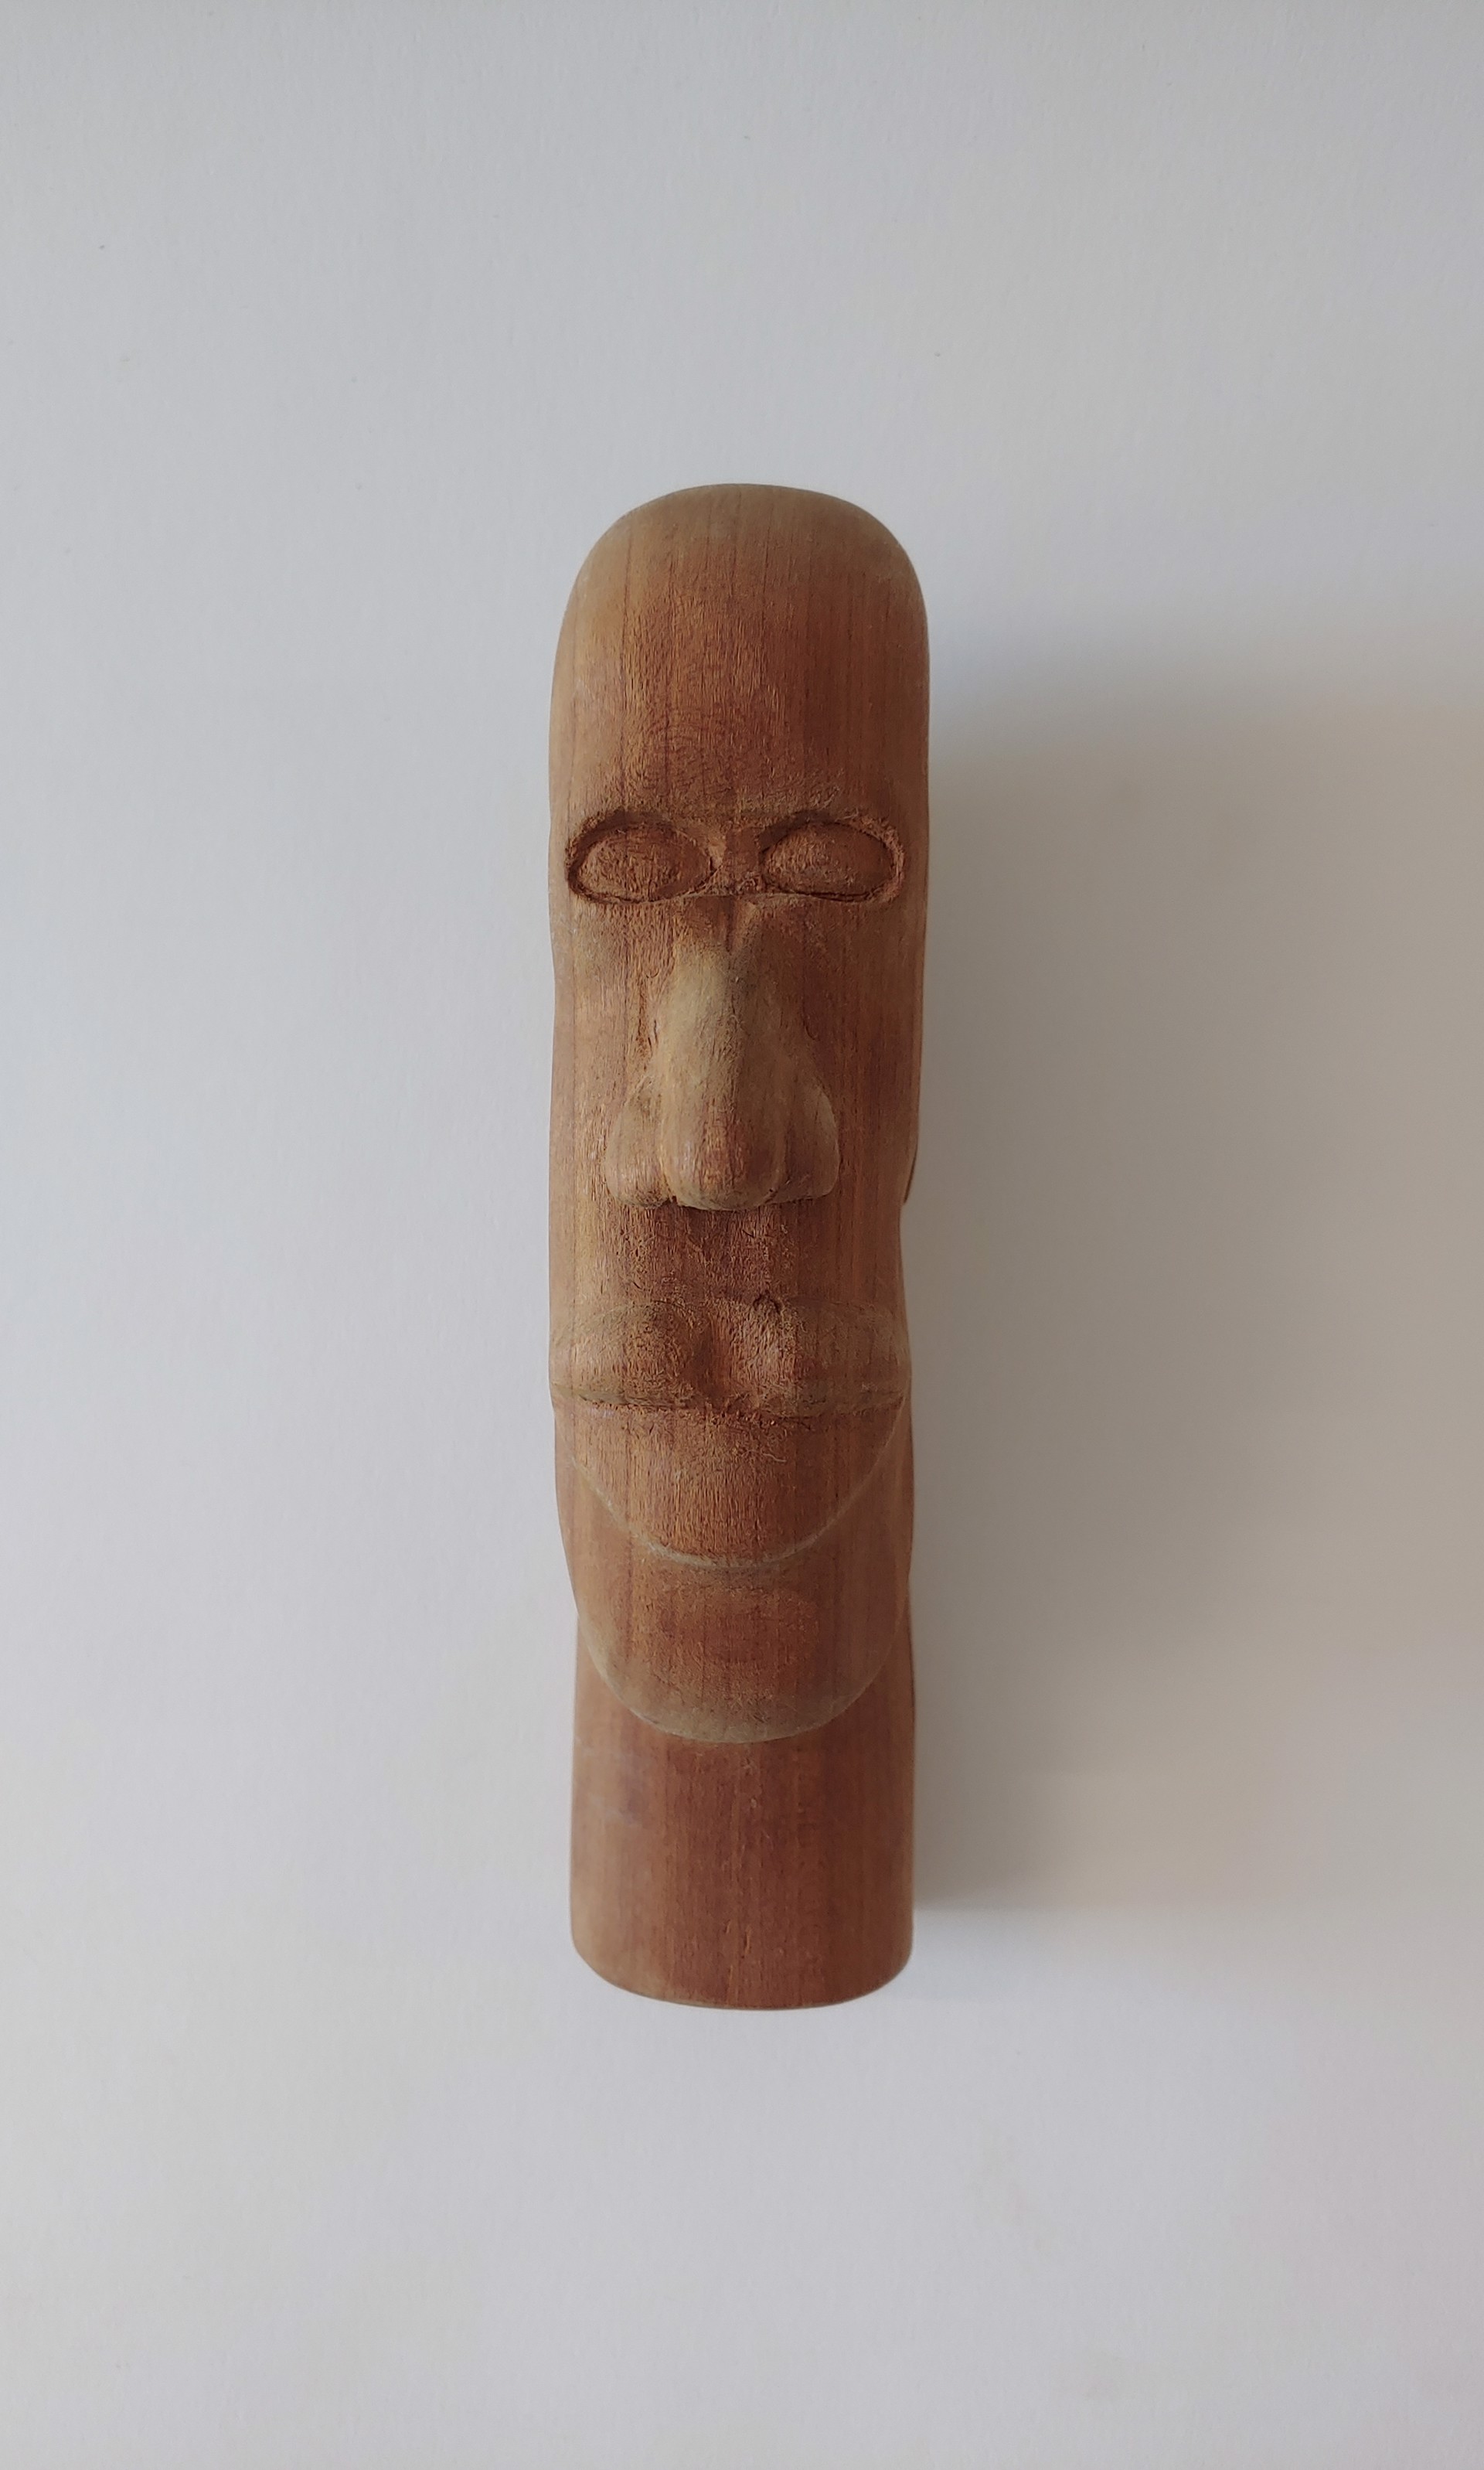 Unfinished Face #2 - Wood Sculpture by David Amdur